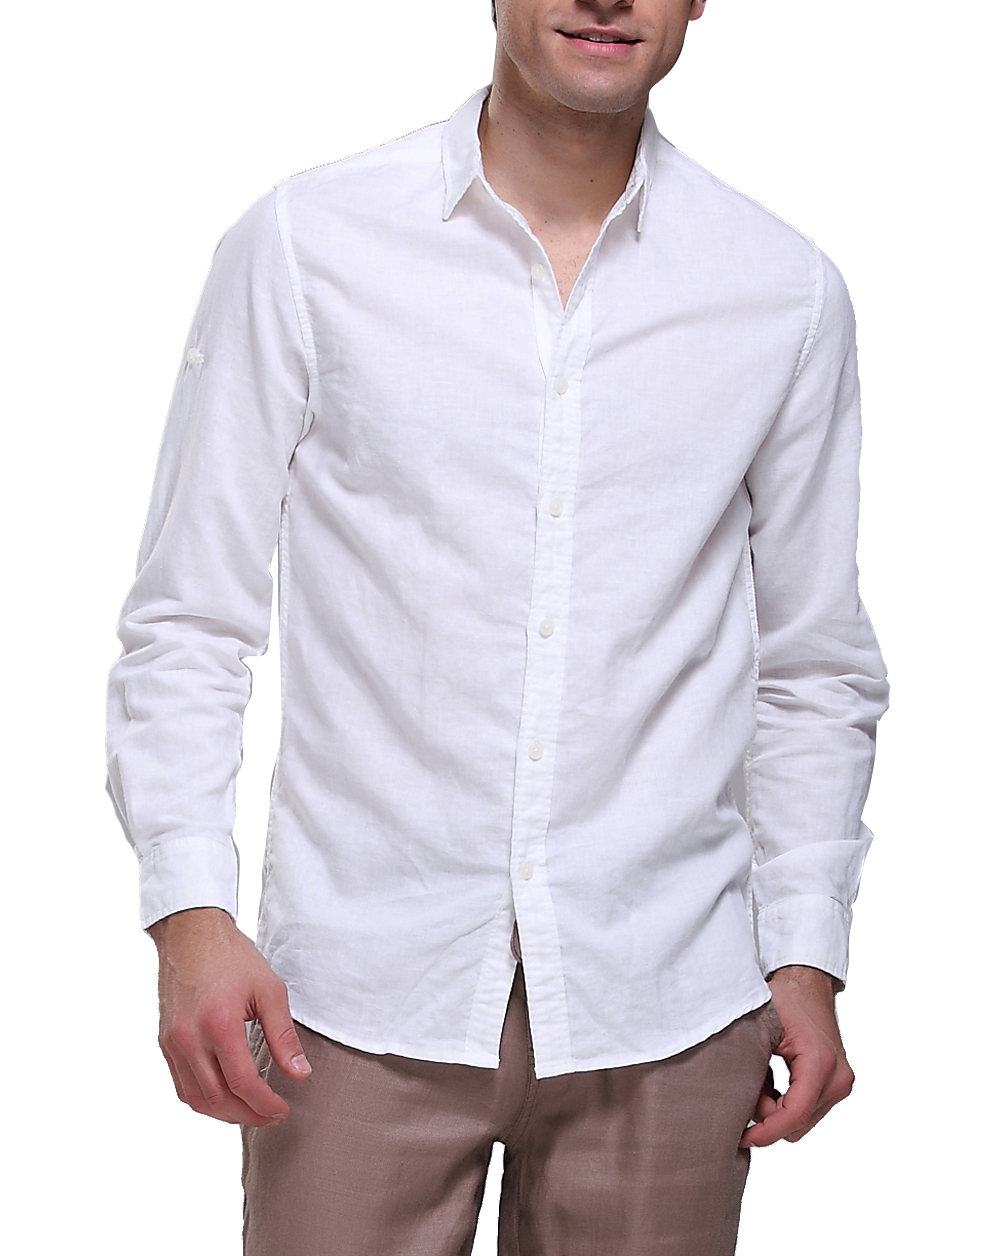 By Lucky Natural Travel: Perfect White Linen Cotton Casual Shirt for ...